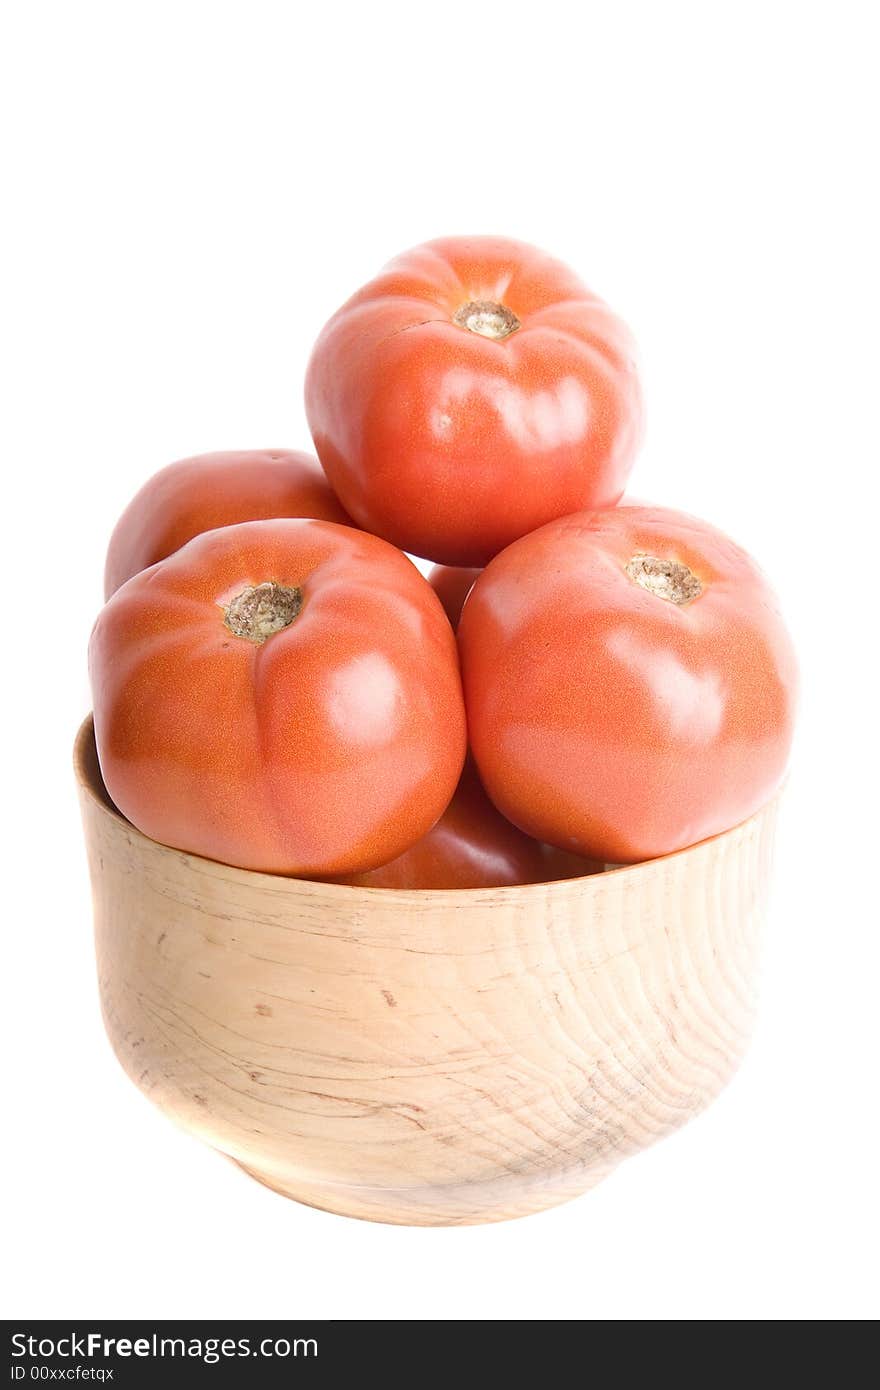 Fresh ripe red tomatoes in a wooden bowl on a white background. Fresh ripe red tomatoes in a wooden bowl on a white background